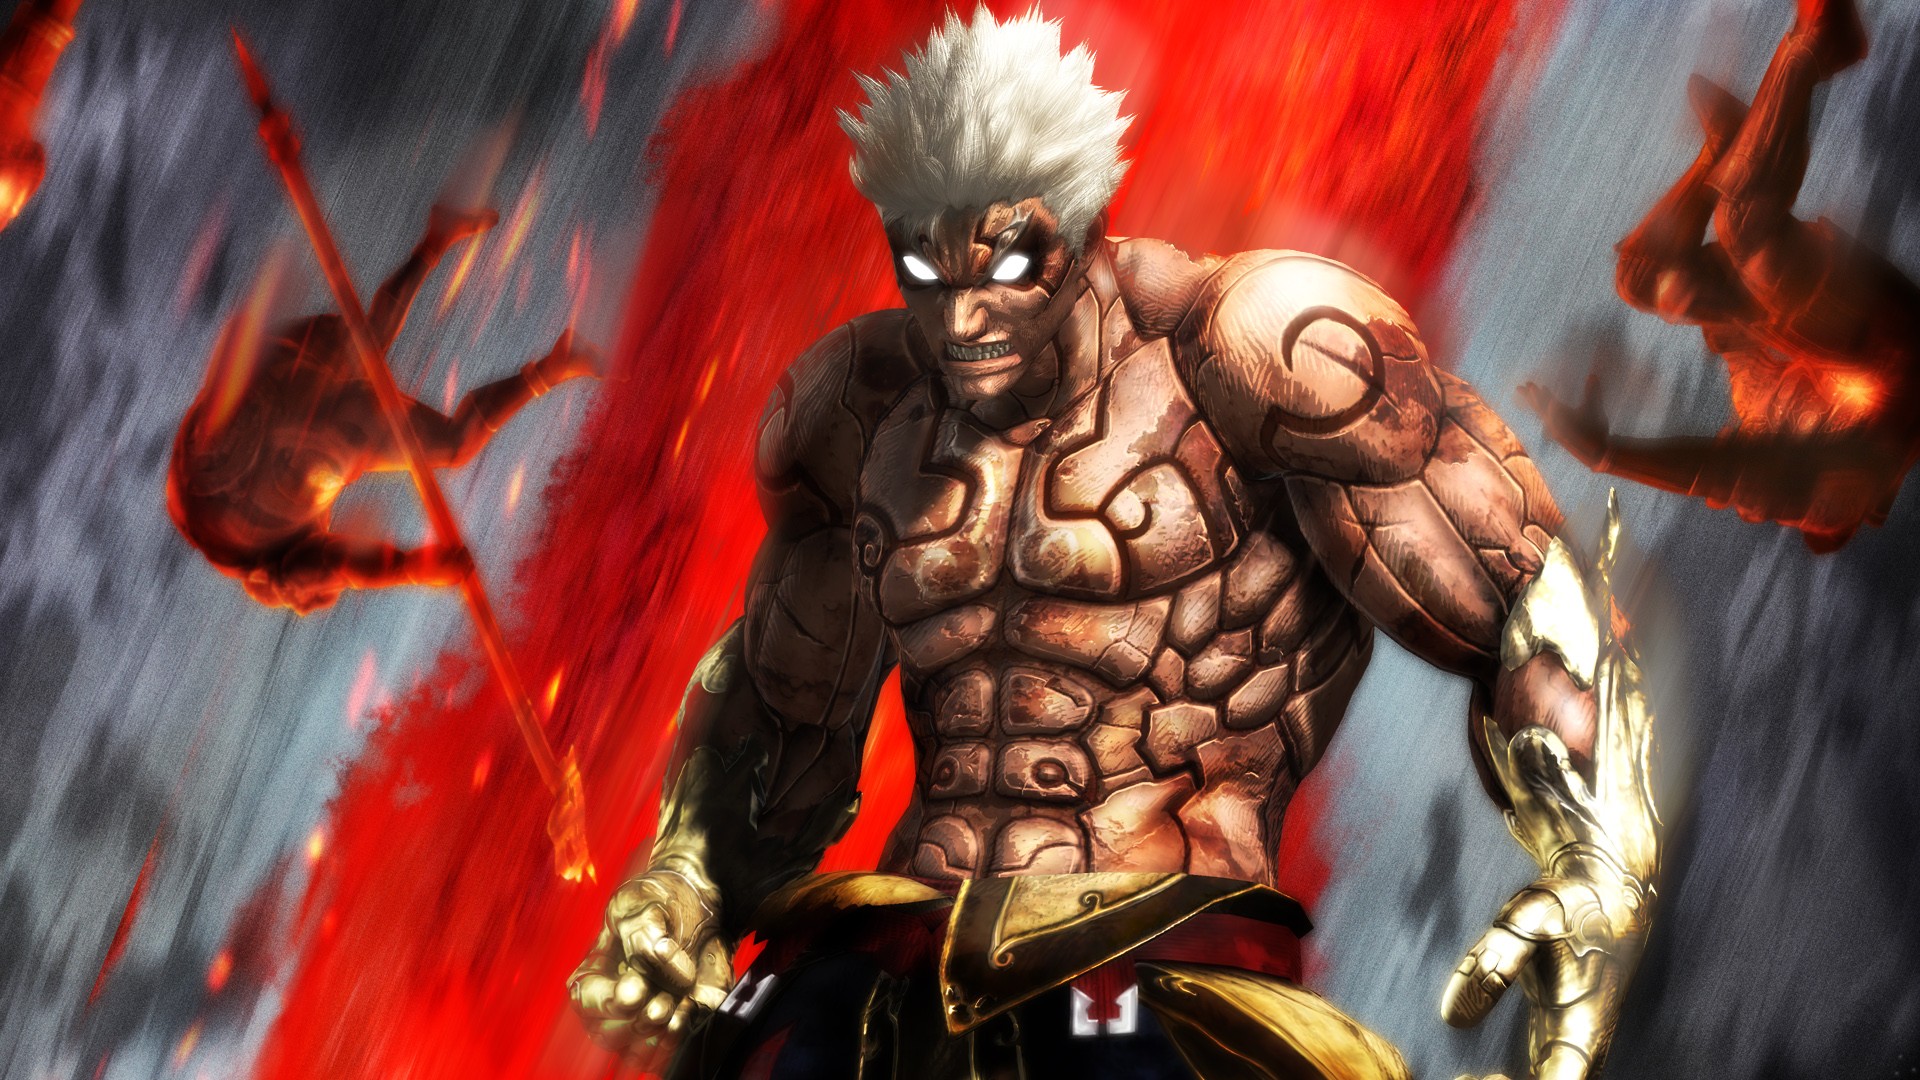 14 Asura's Wrath HD Wallpapers | Backgrounds - Wallpaper Abyss